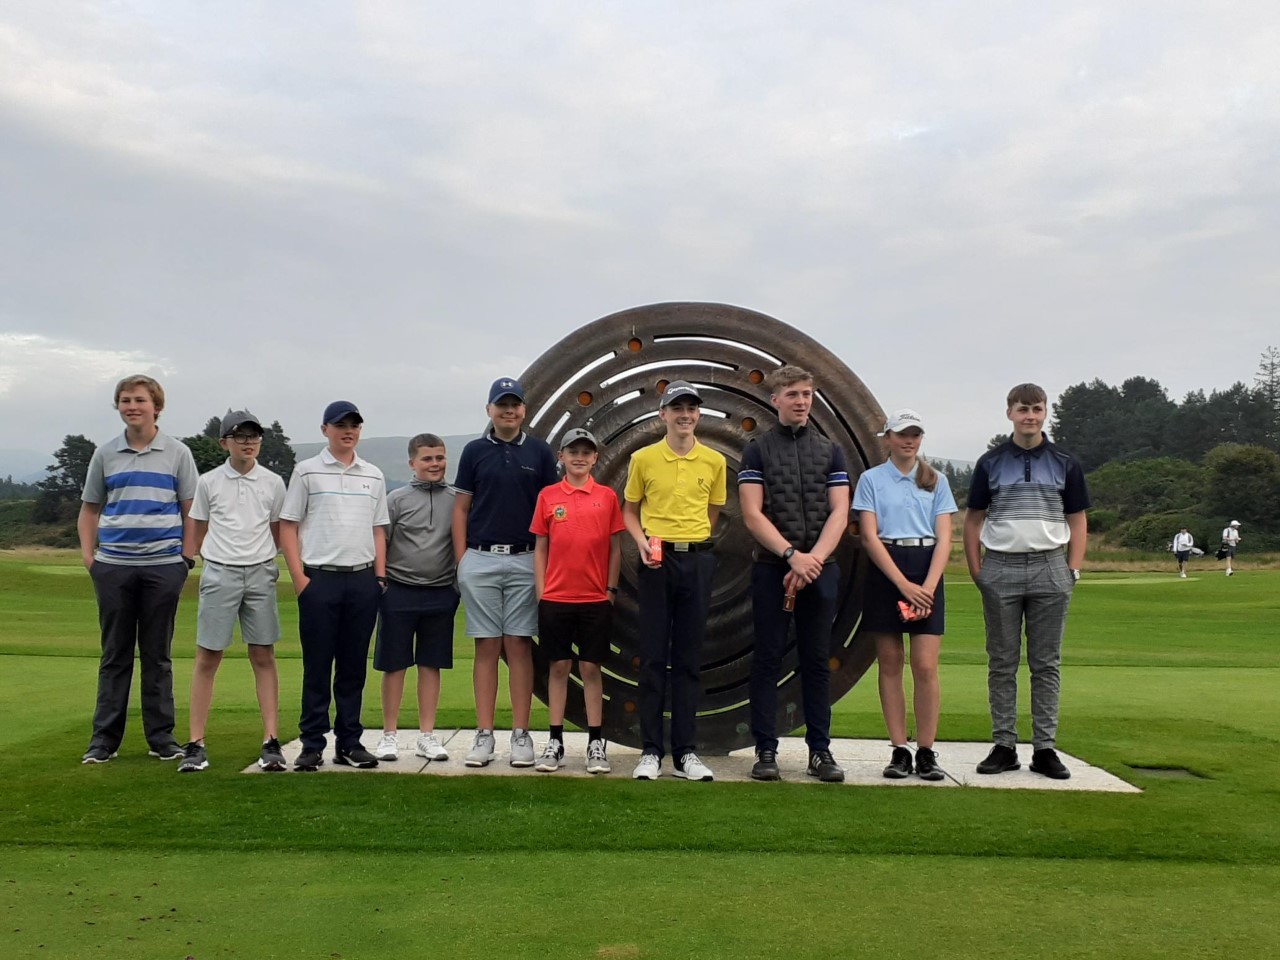 A 'Race to Gleneagles' for young Forth Valley golfers